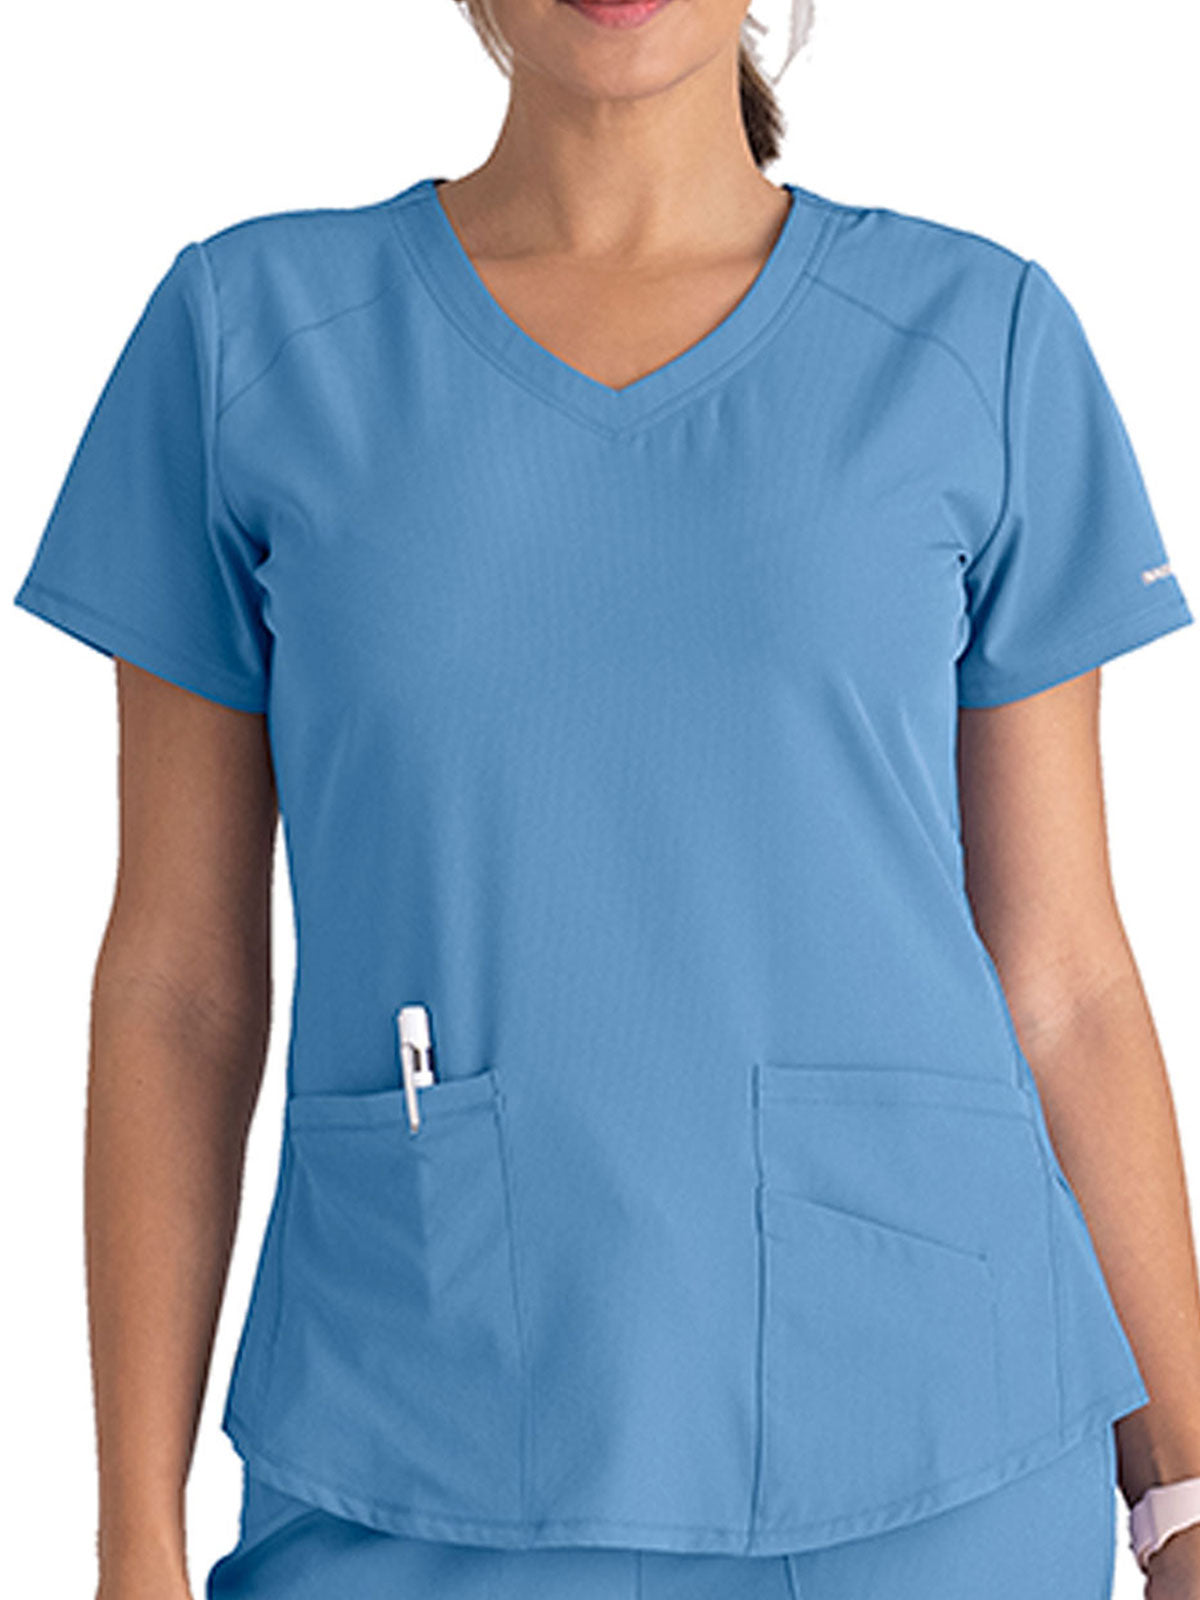 Women's Reliance Scrub Top - Skechers Collection / Color - Pewter